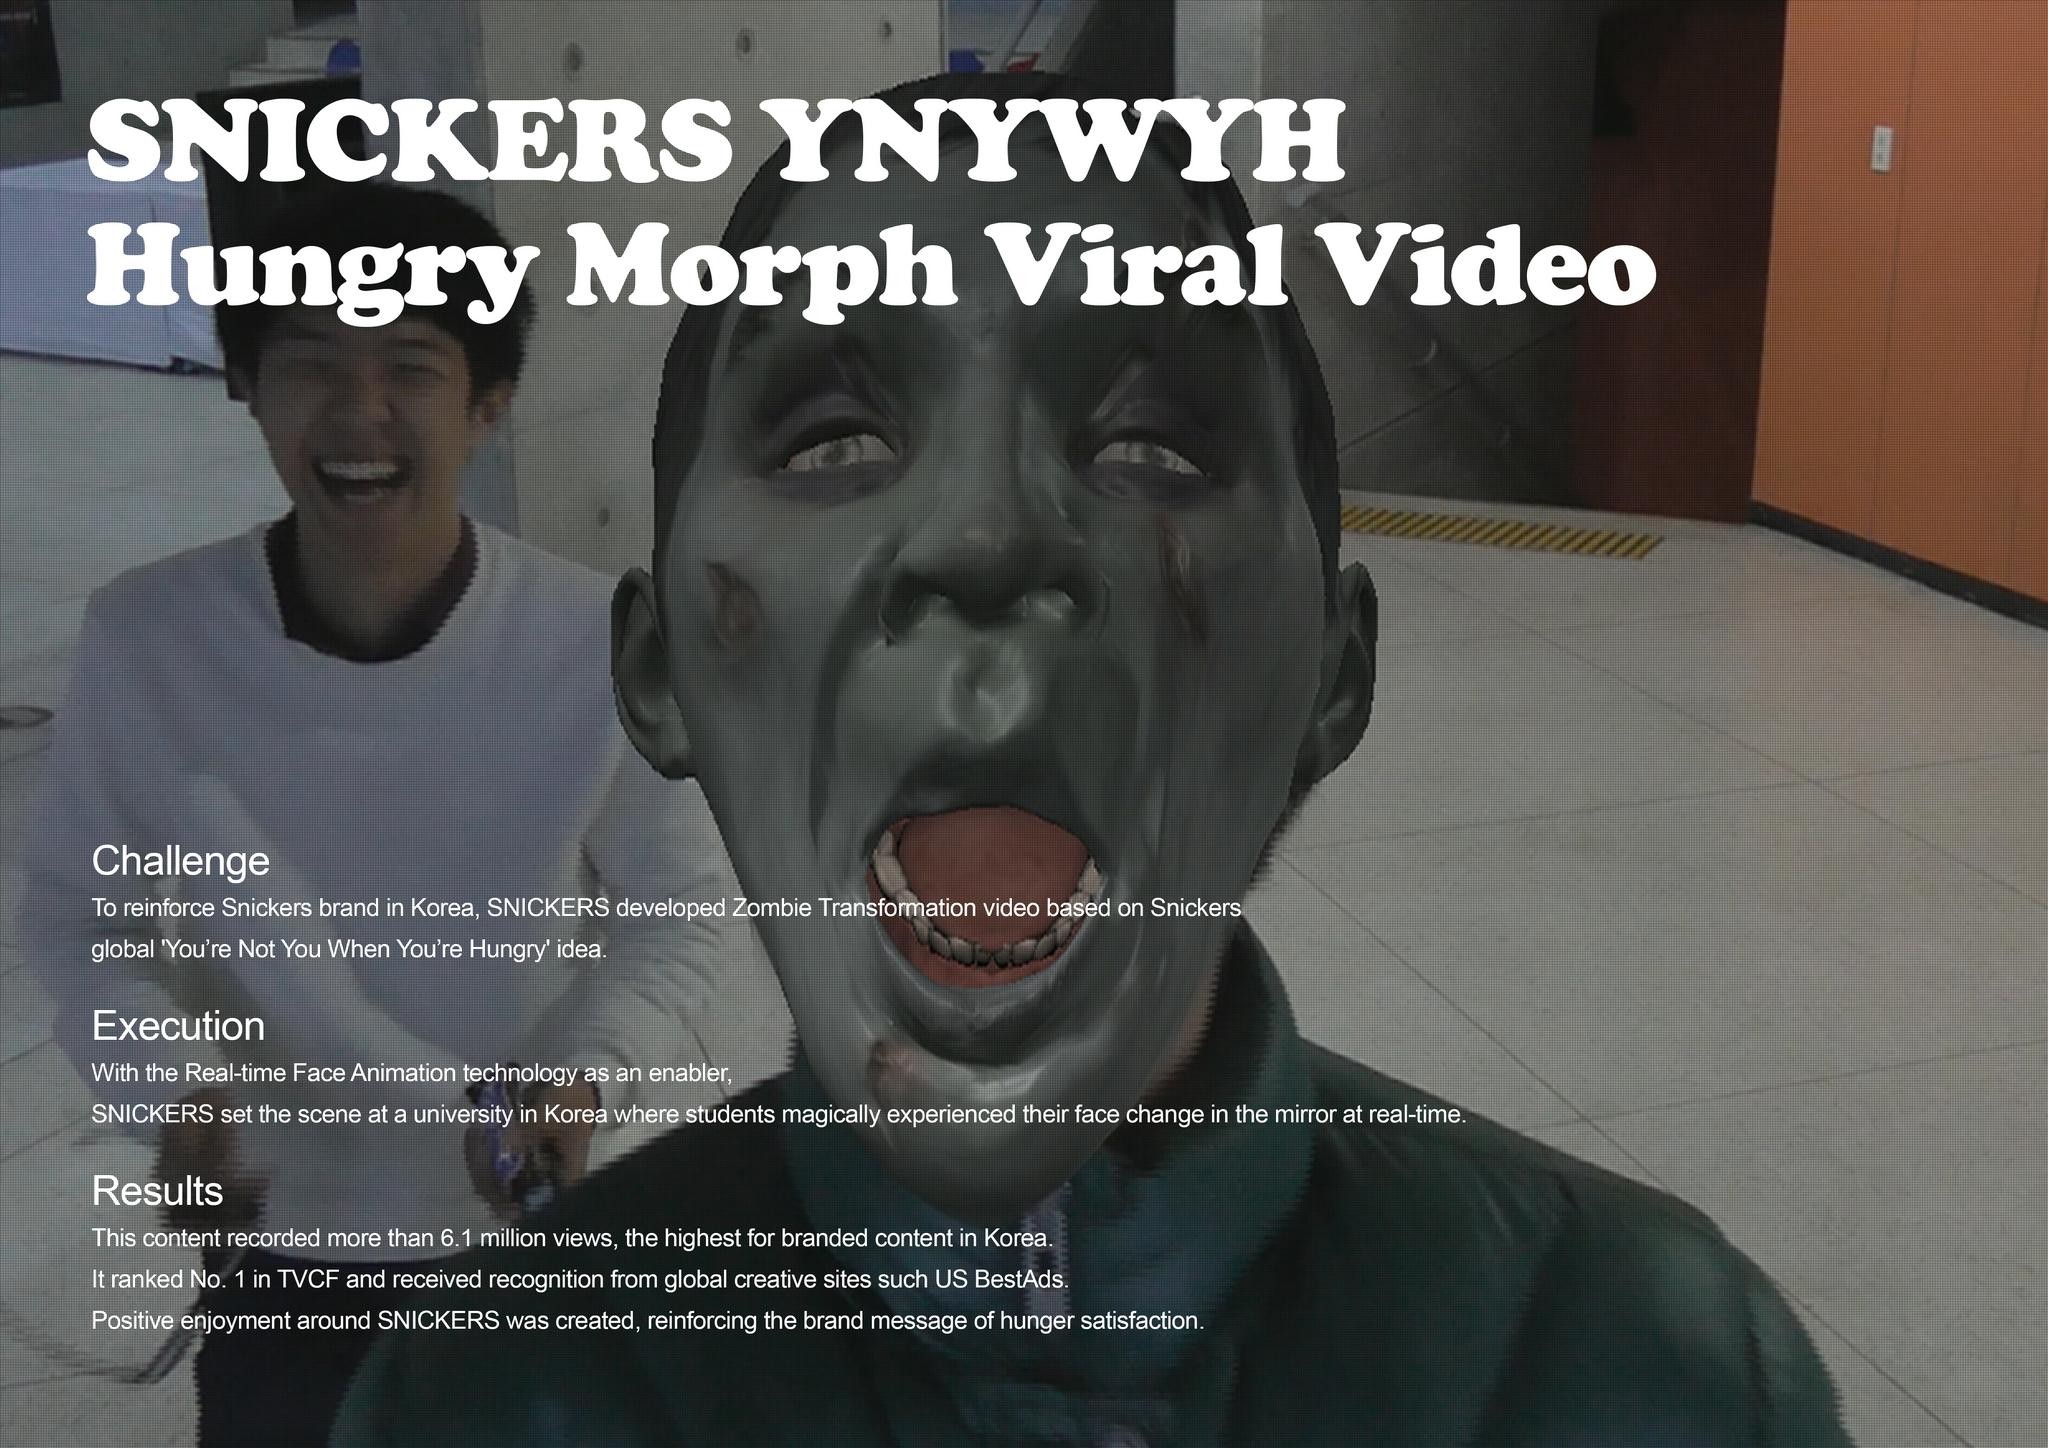 SNICKERS : HUNGRY MORPH VIRAL VIDEO